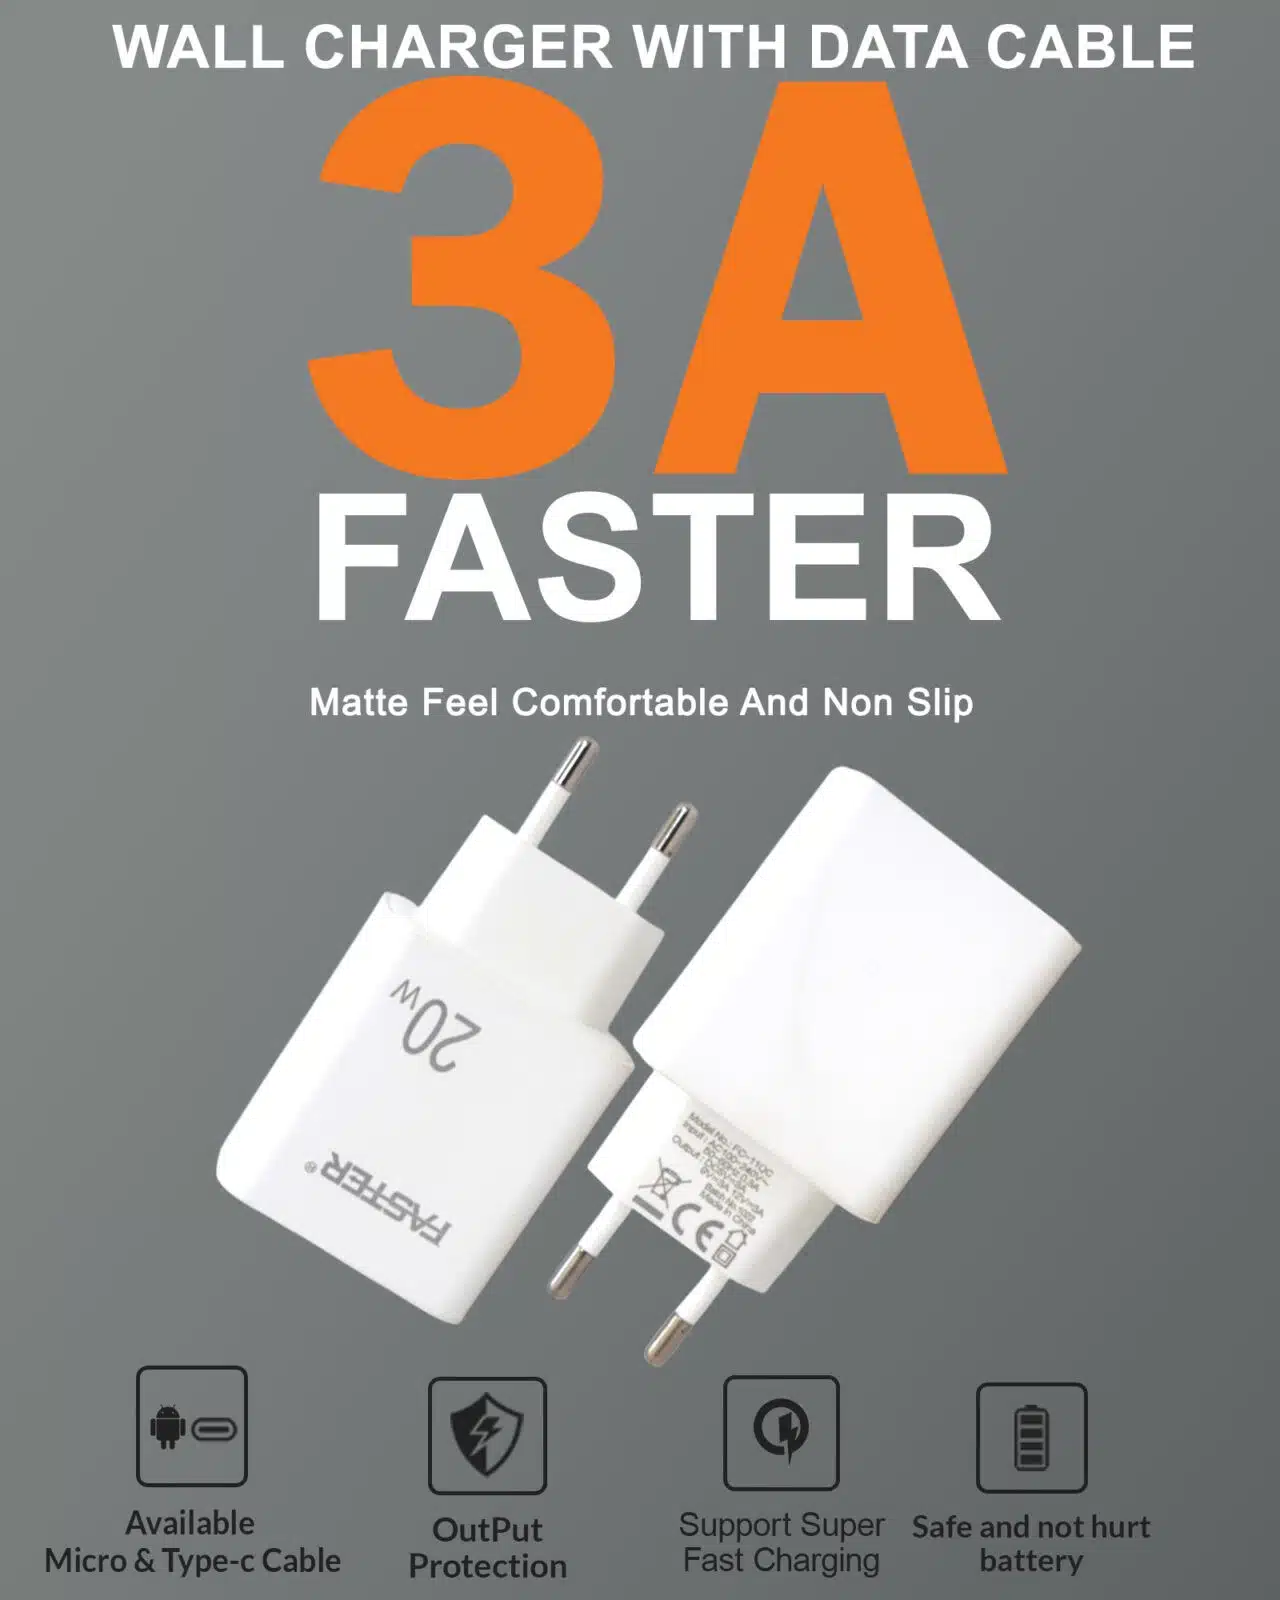 FASTER -FC-11QC- Fast- Wall- Charger- 20W- Qualcomm- QC -3.0A